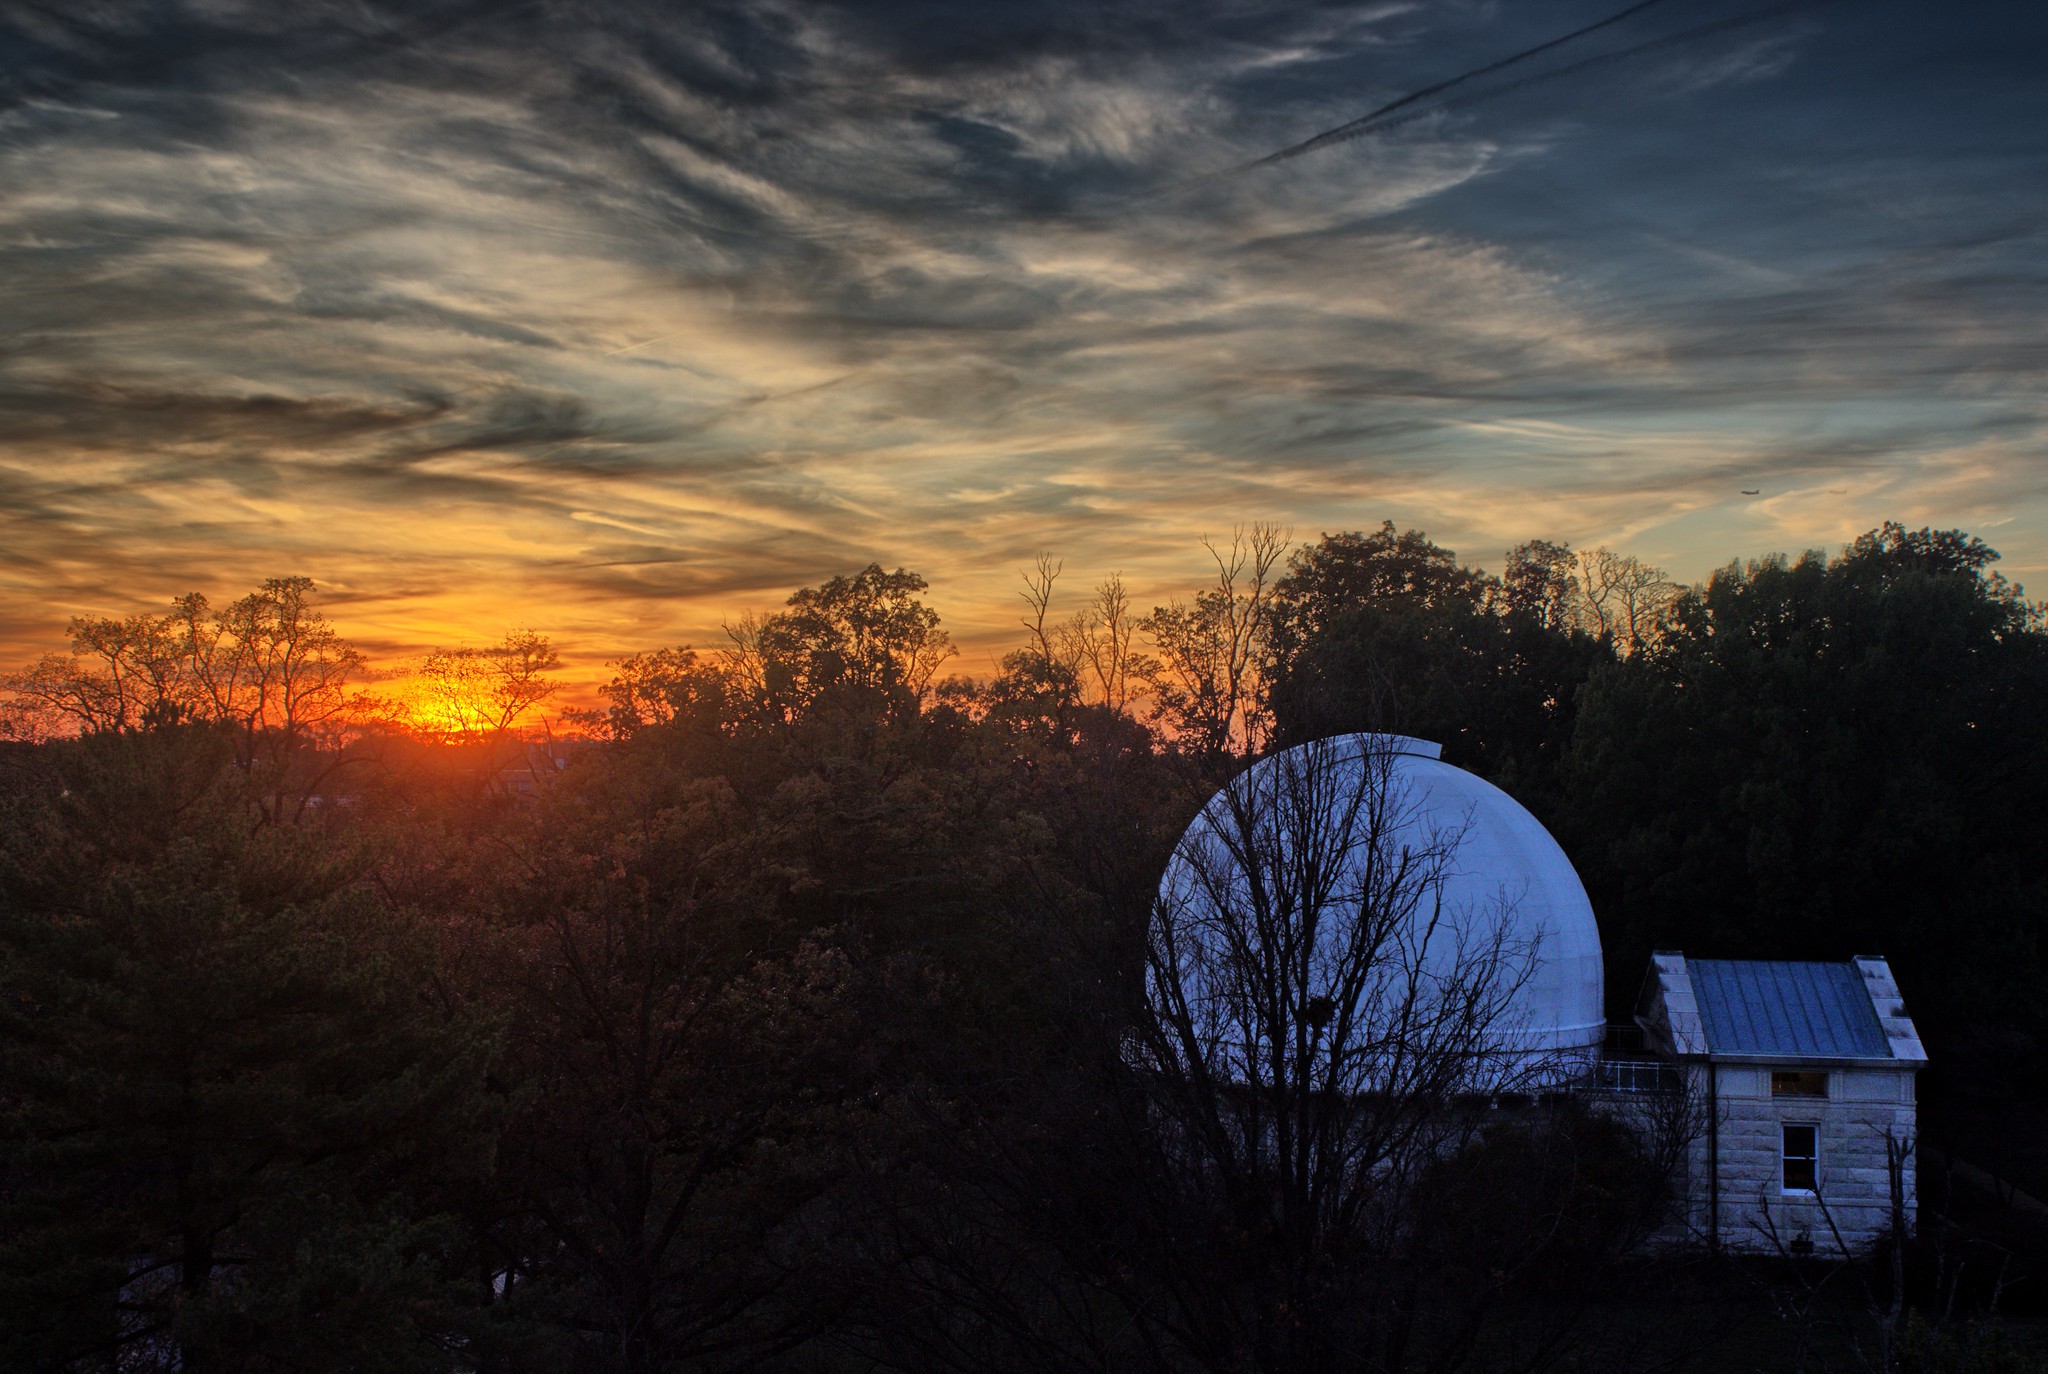 Dome of the 26-inch "Great Equatorial" telescope at dusk, U.S. Naval Observatory, Washington, DC